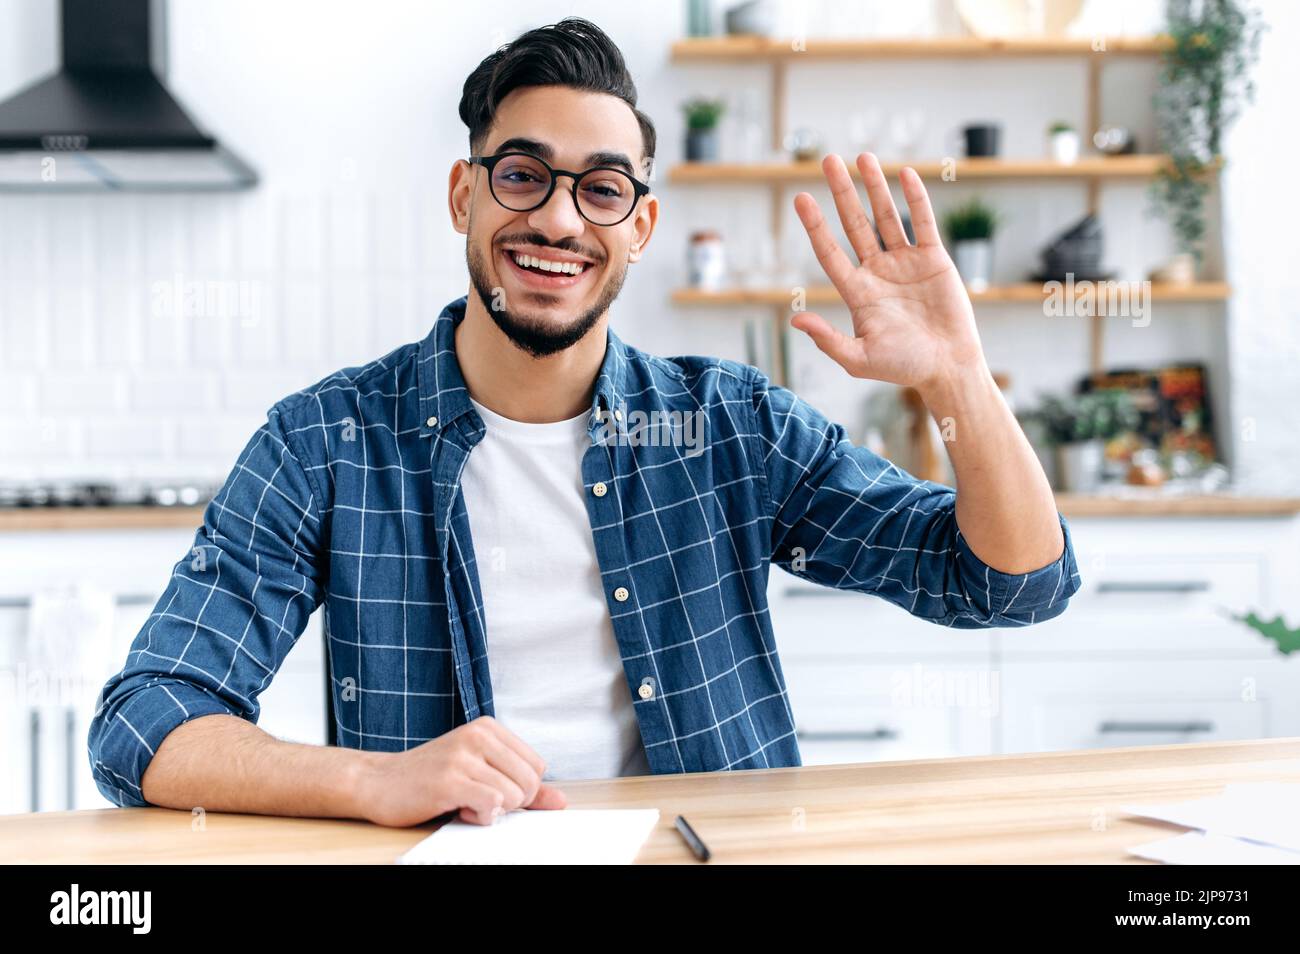 Confident positive indian or arabian man, sit at desk at home, talk on webcam, having video call or conversation with client or colleague, mentor record training course, waves hand, smiling friendly Stock Photo